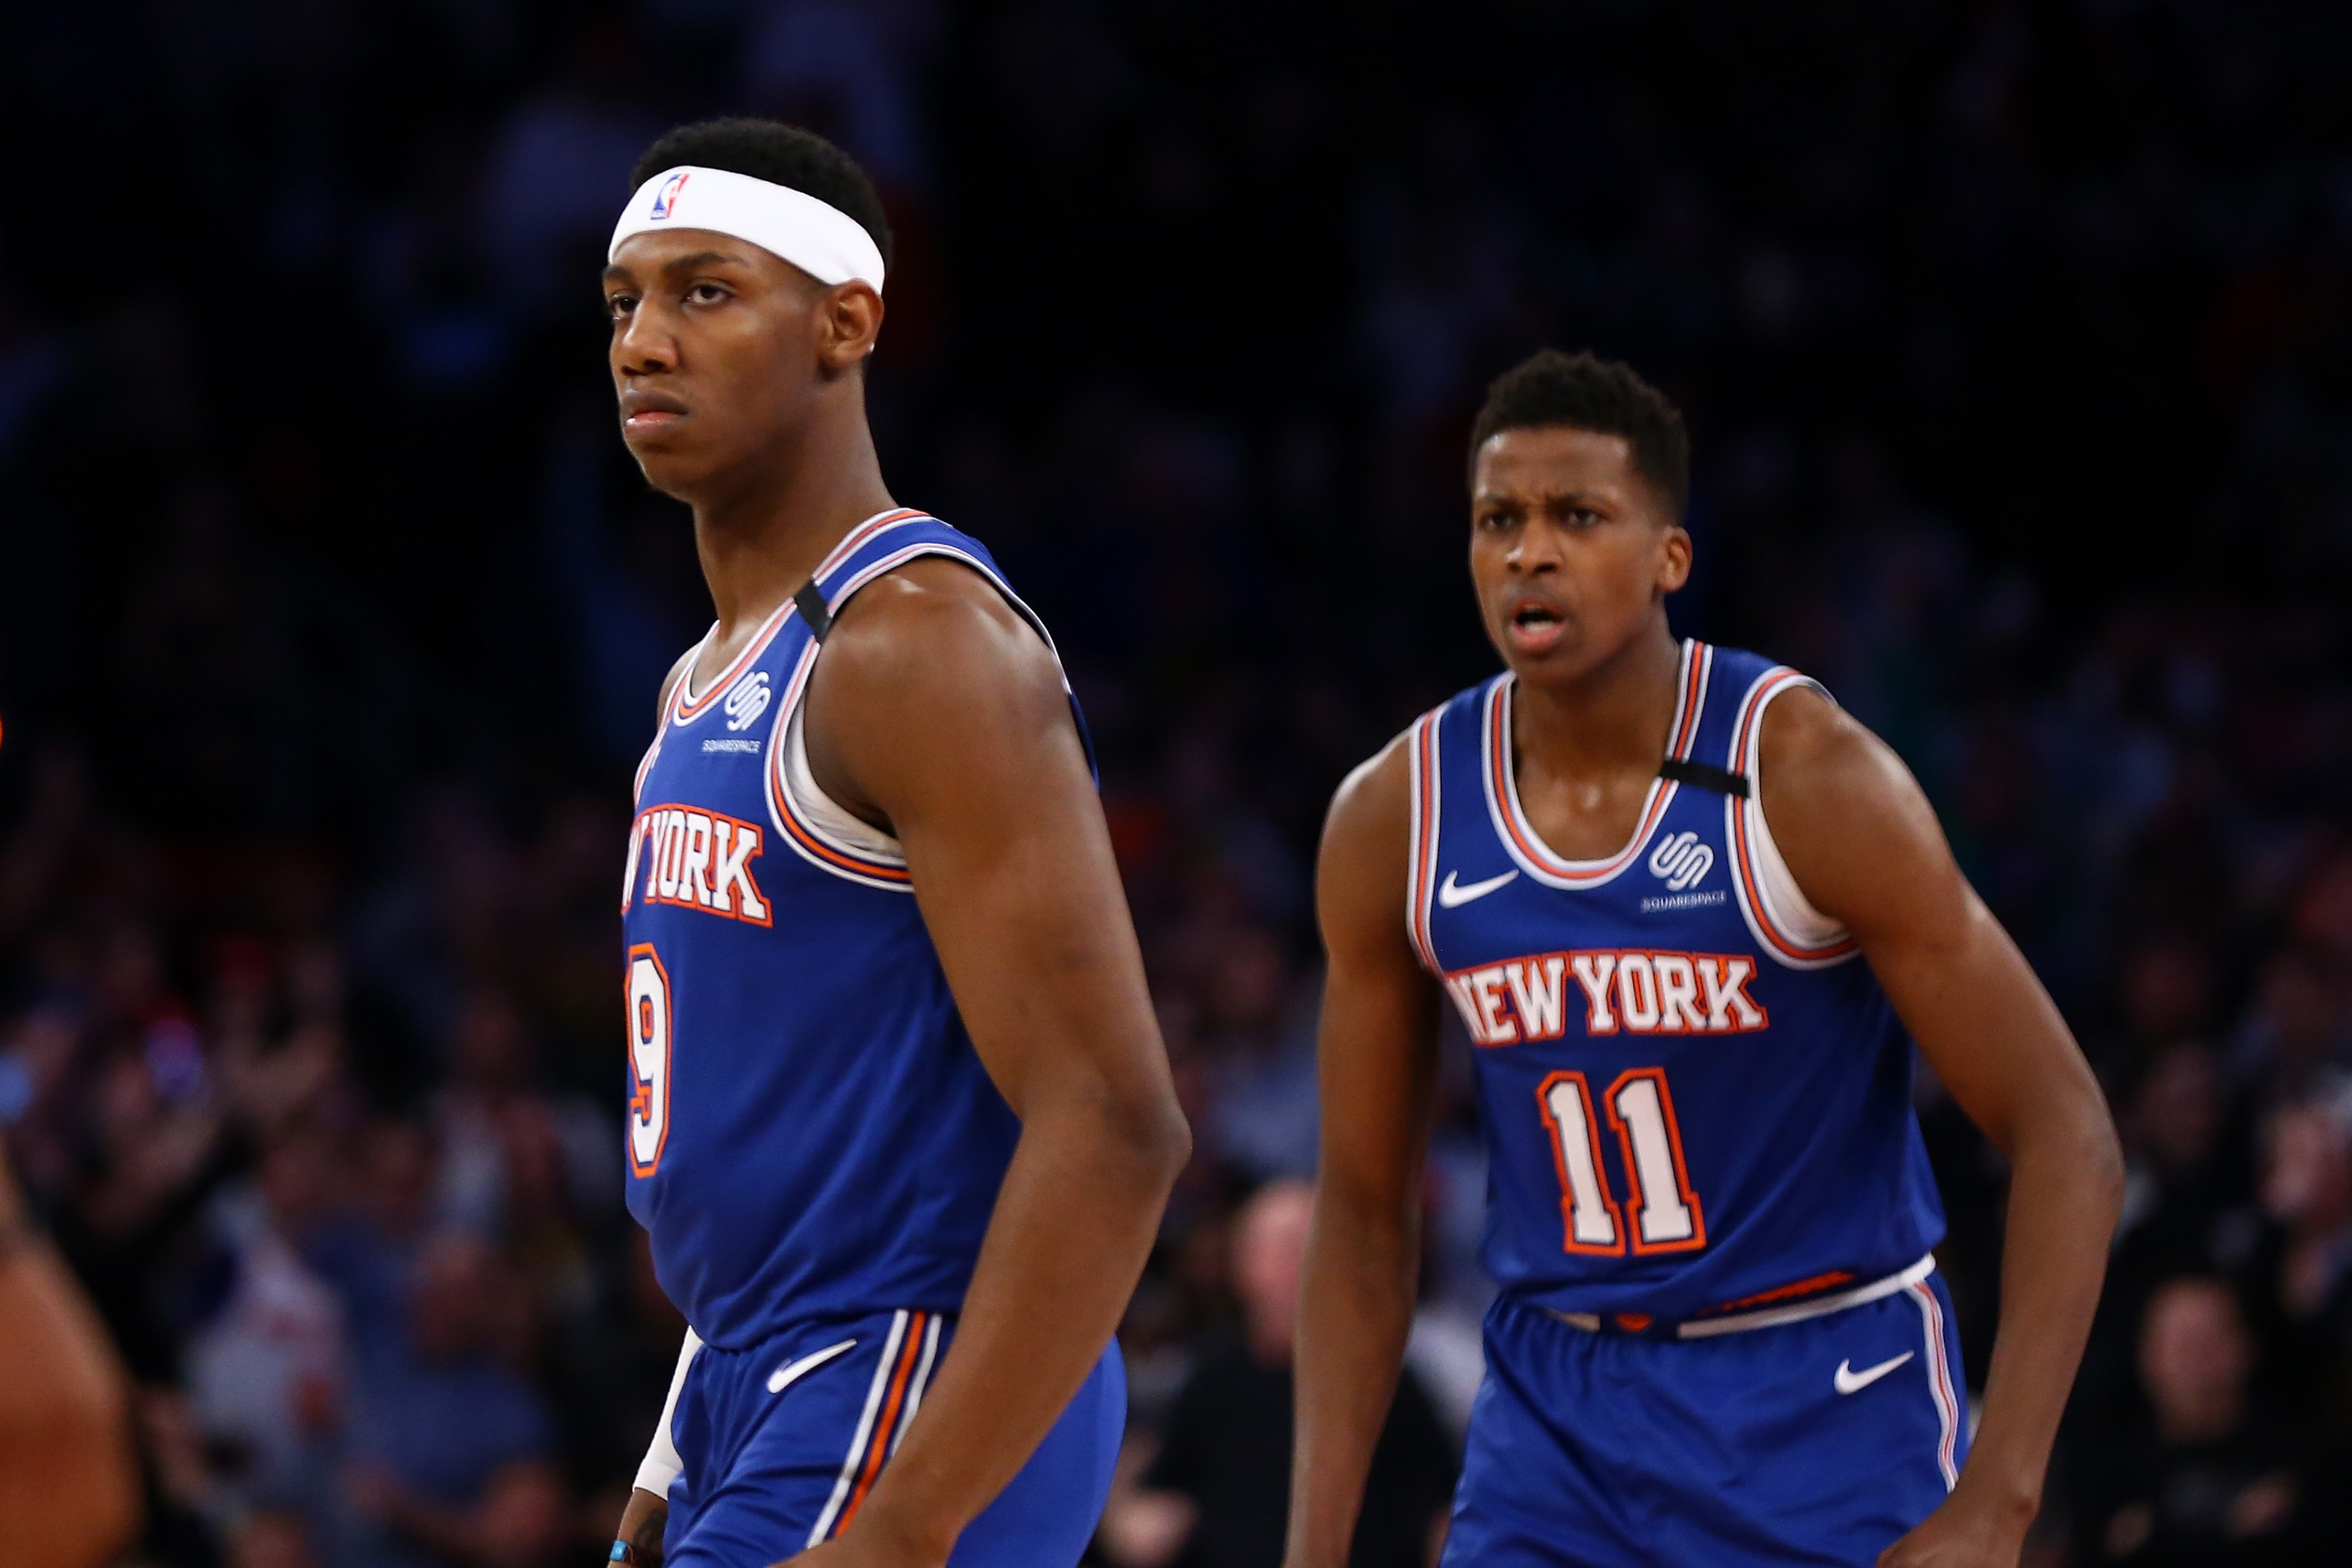 What was the best NY Knicks lineup? - Quora